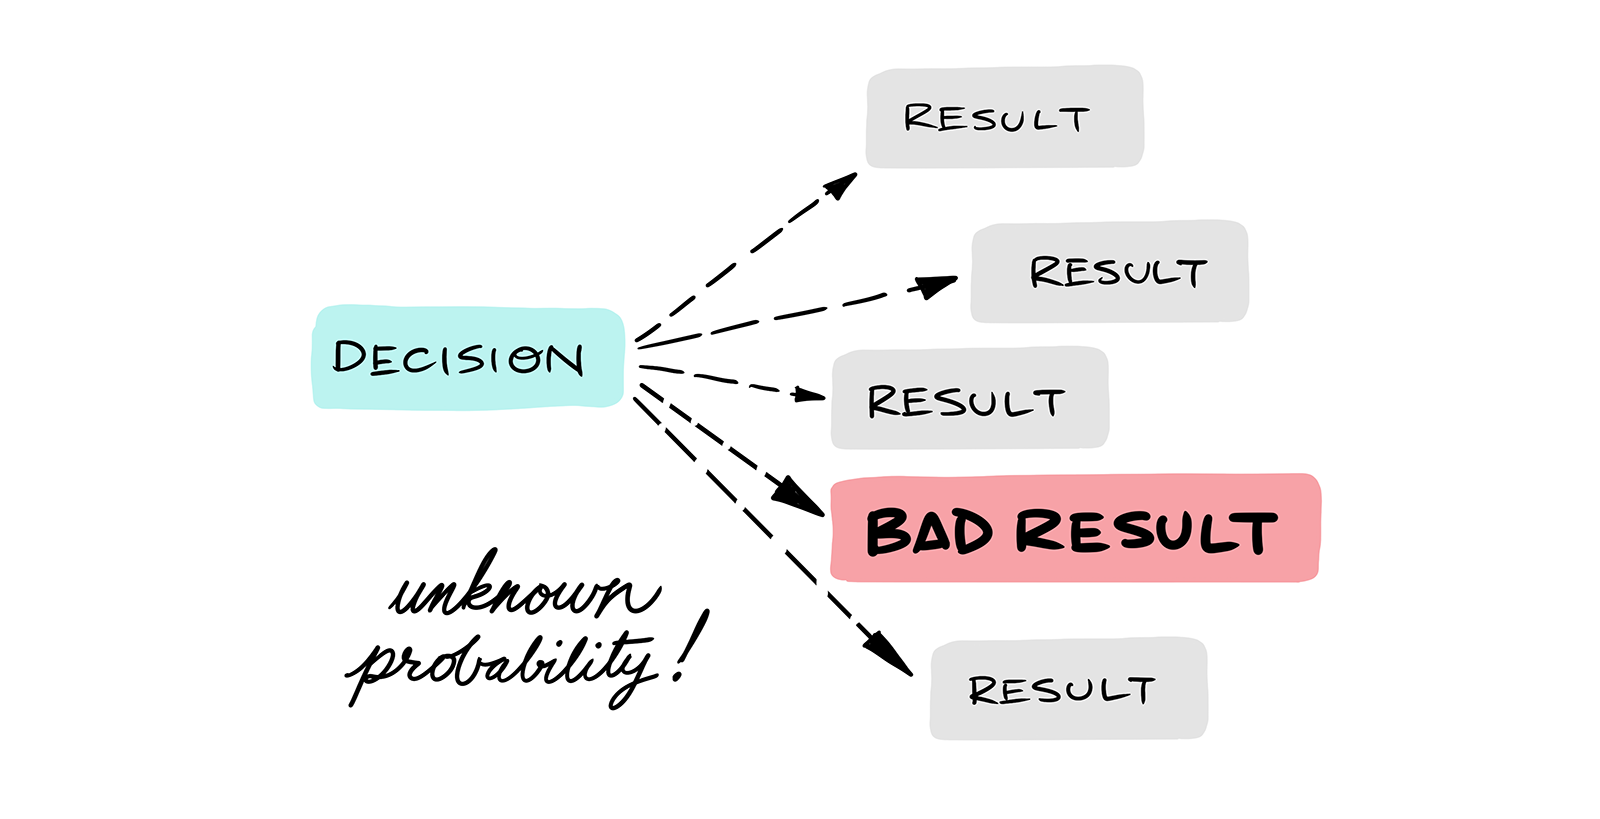 Diagram showing a decision and then a whole range of results but only fixating on one bad one